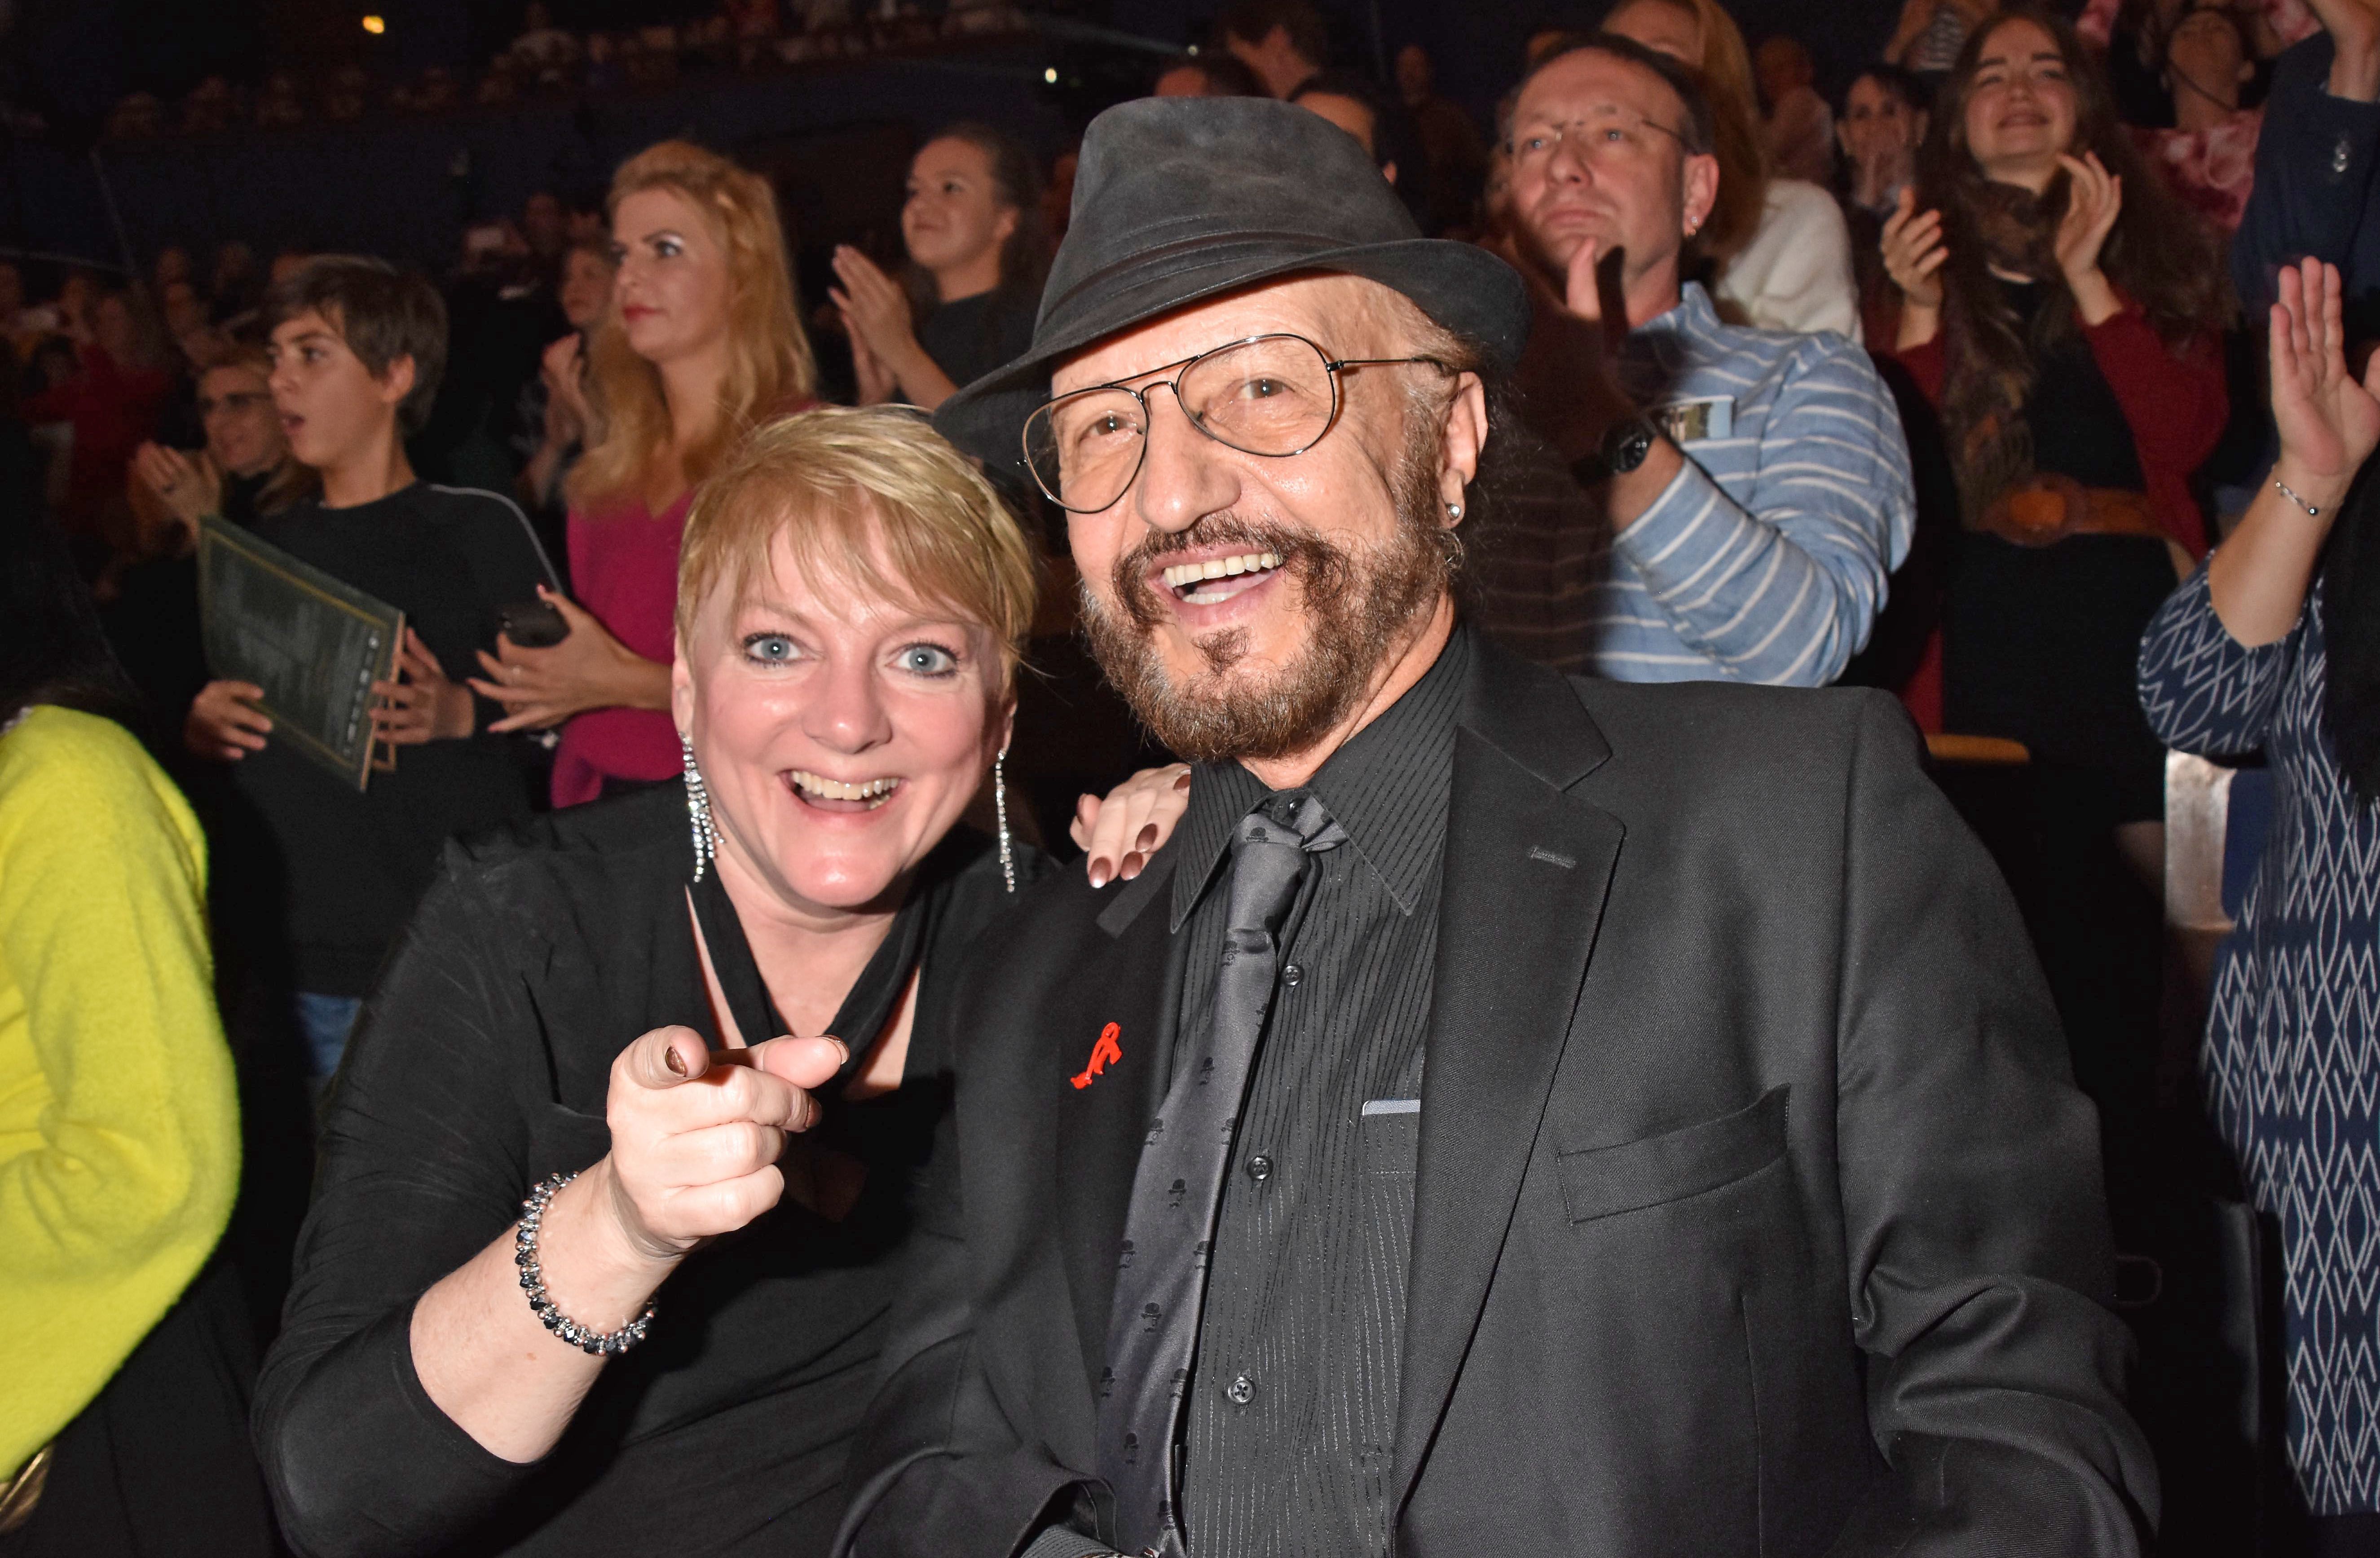 Alison Arngrim and Robert Paul Schoonover at the Young Show "Im Labyrinth der Buecher" on November 17, 2019, in Berlin, Germany | Photo: Tristar Media/Getty Images